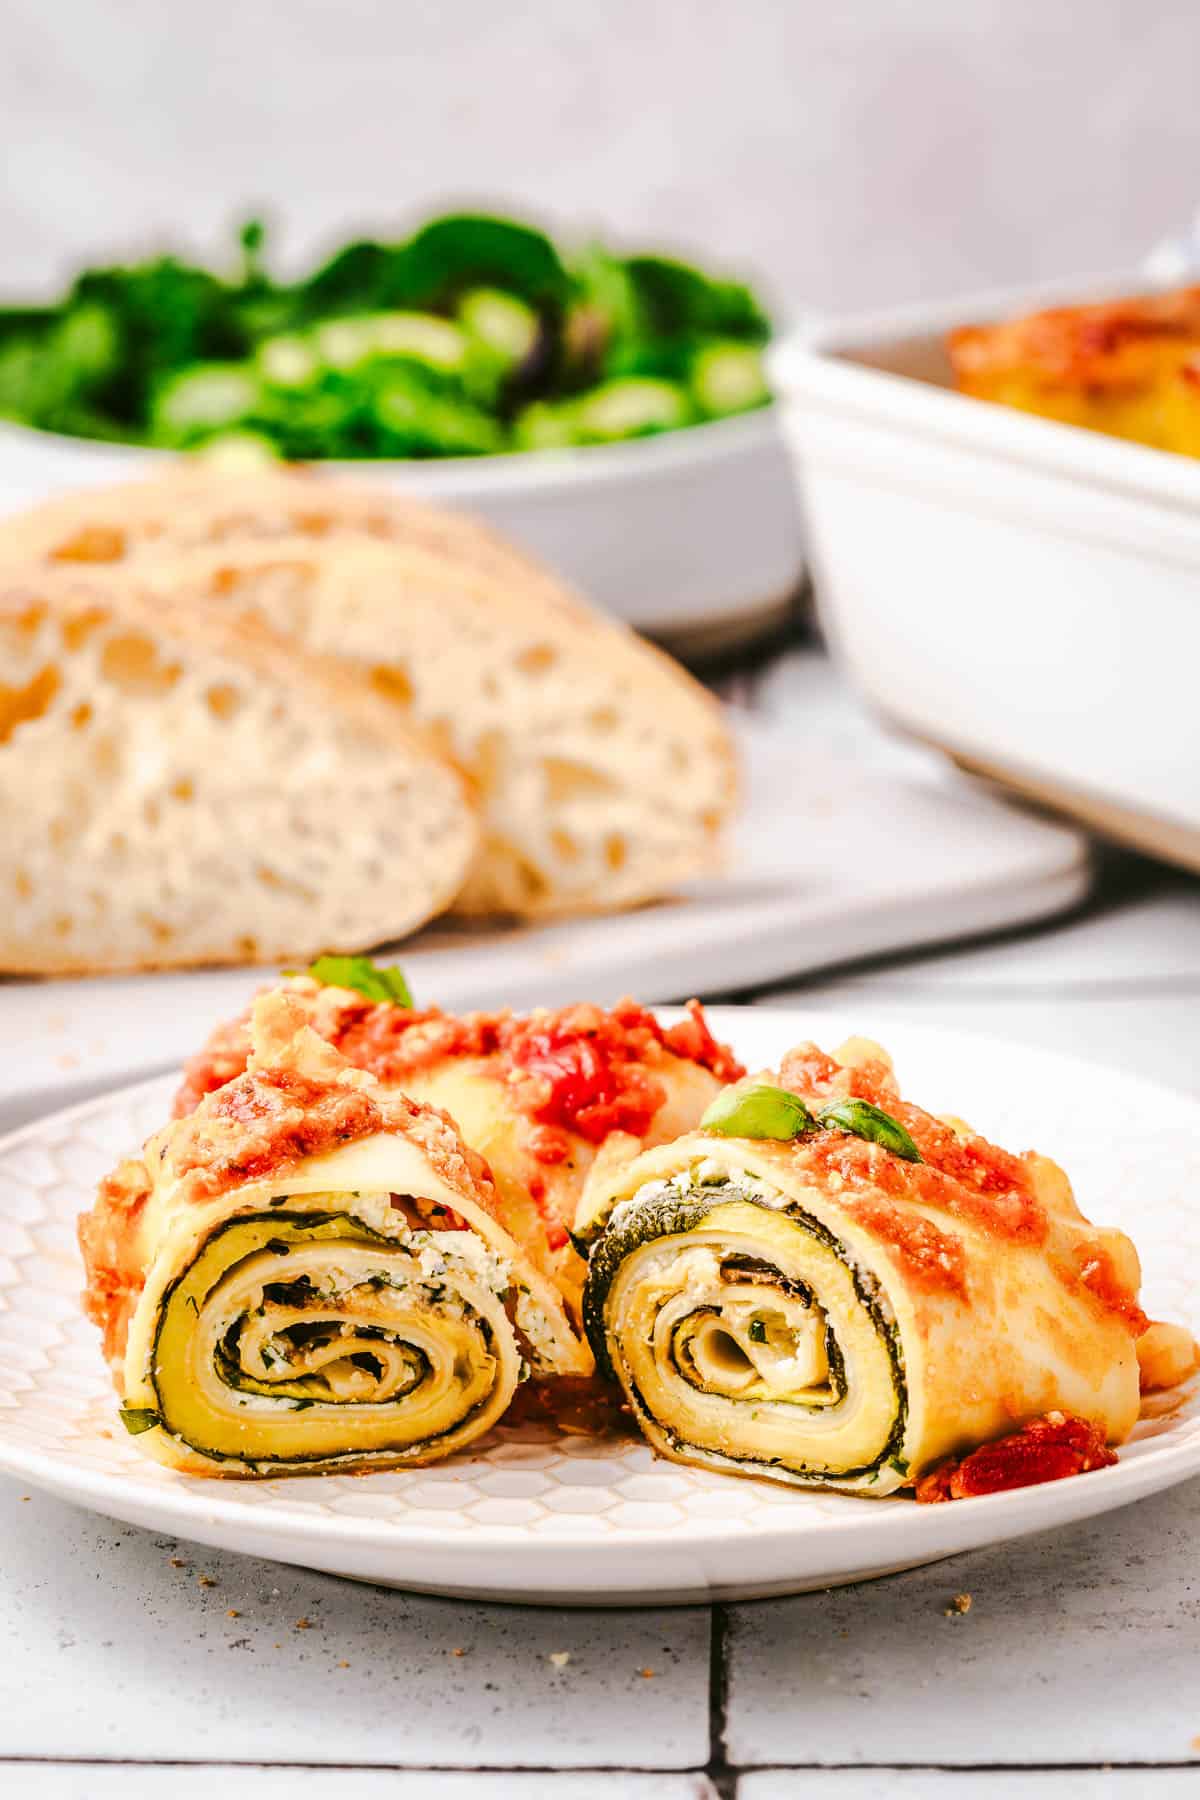 a lasagna roll up cut in half on a plate with a plate of sliced bread and a bowl of salad in the background.